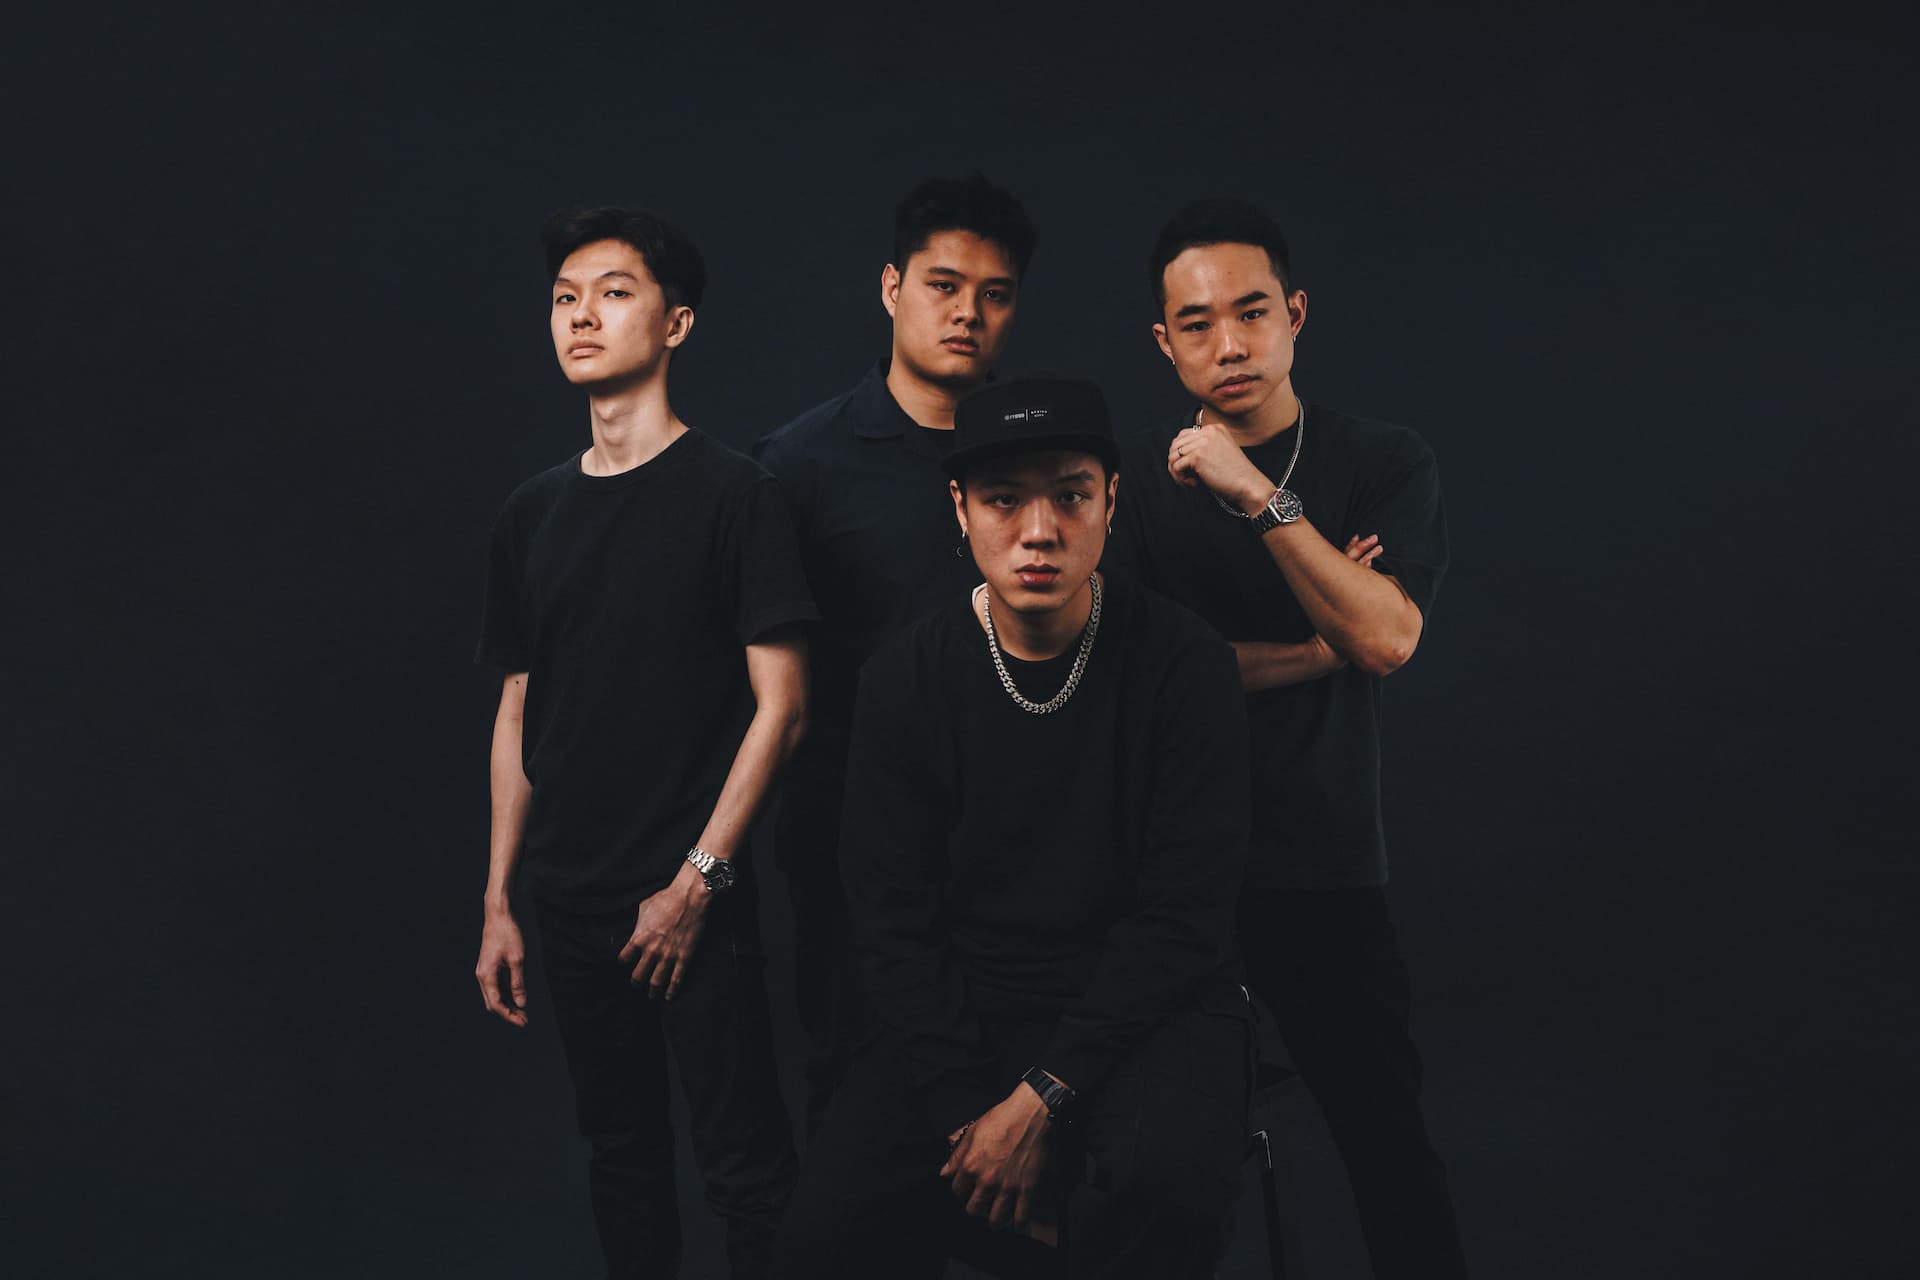 Four individuals of Asian descent standing together against a dark background.